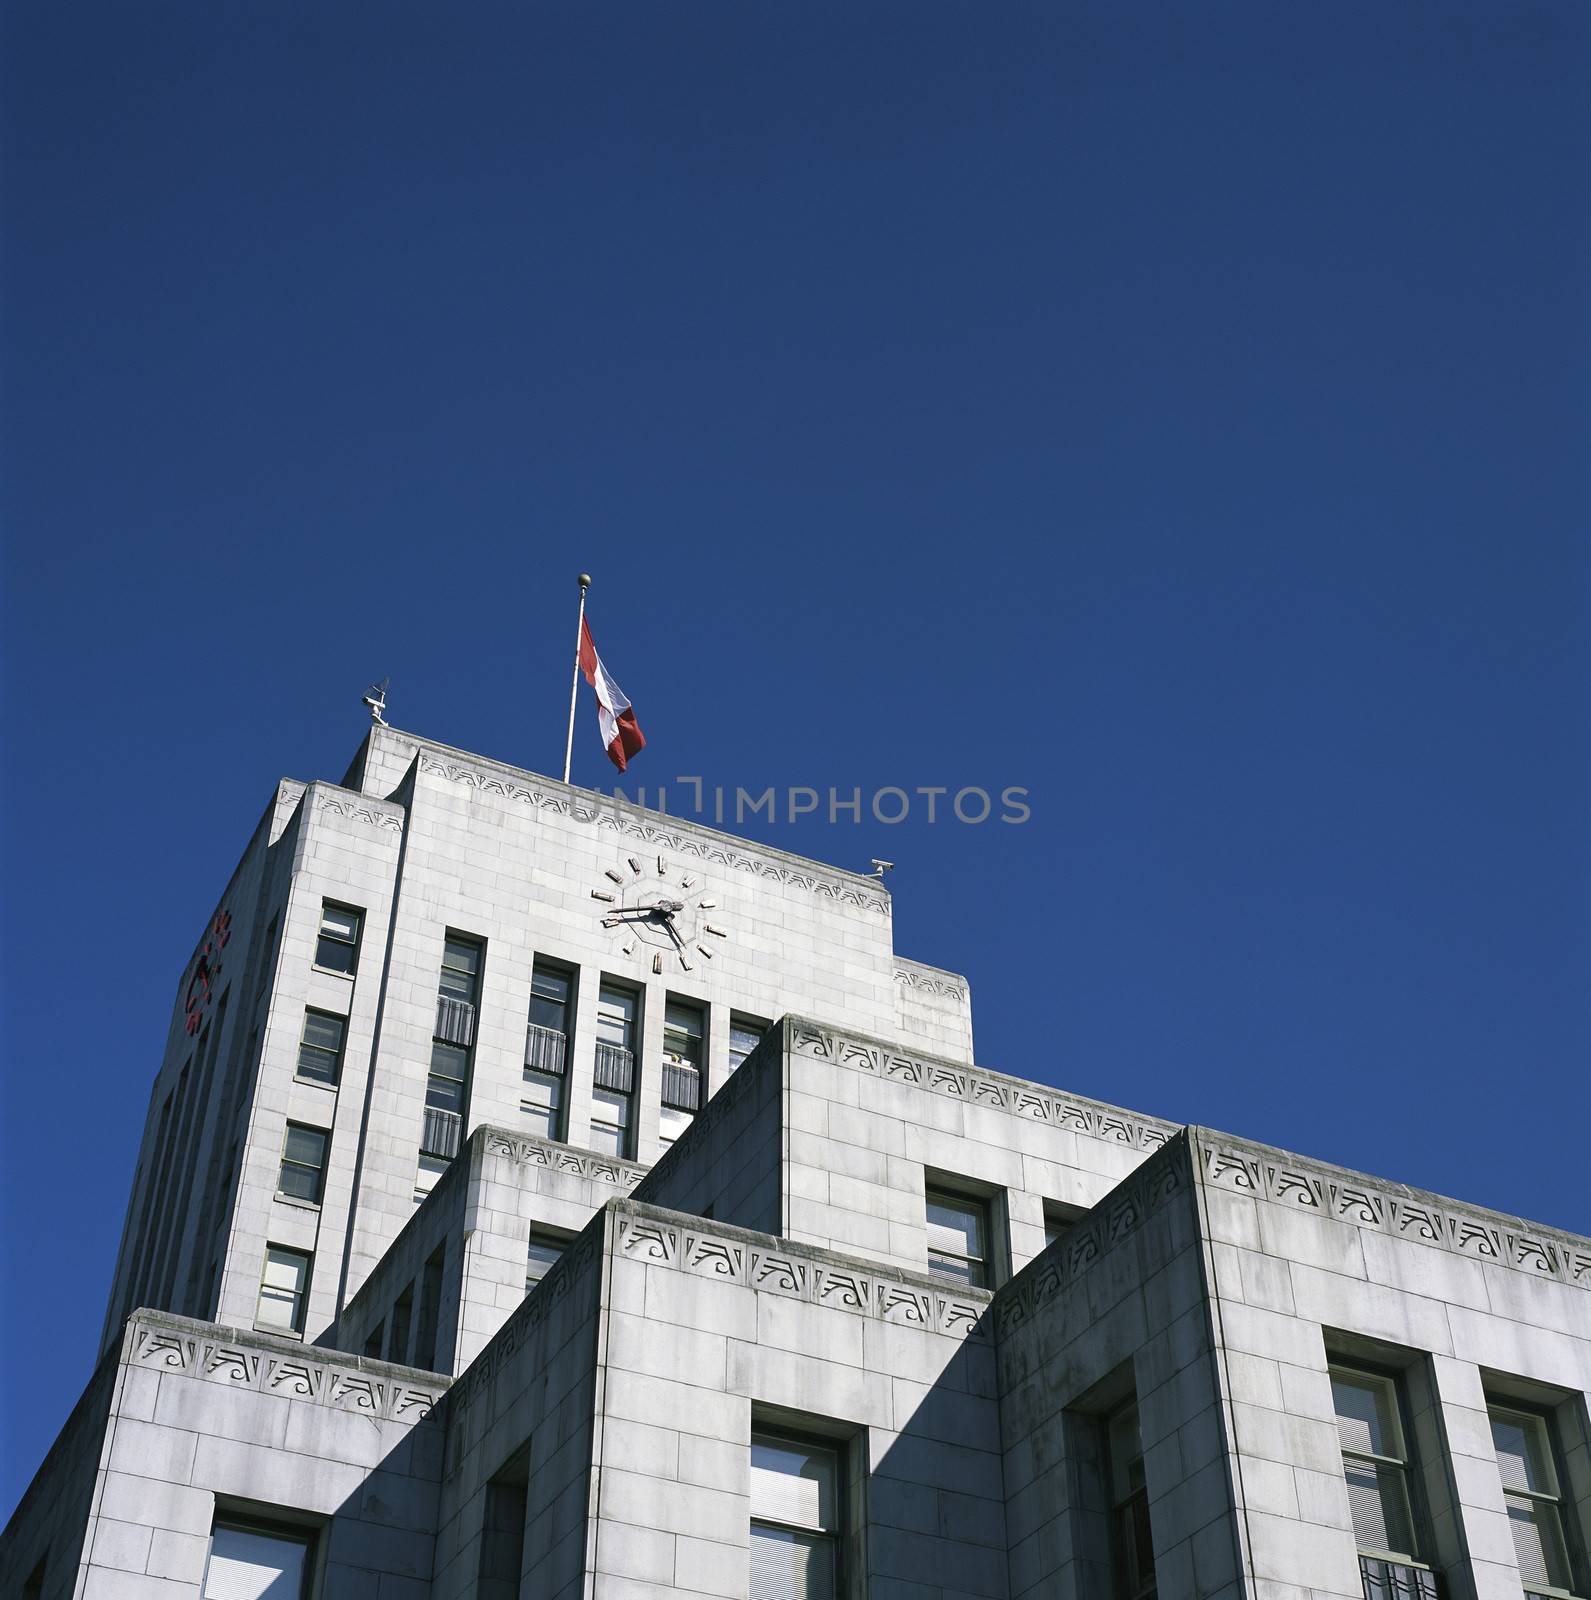 Large city hall building with canadian flag